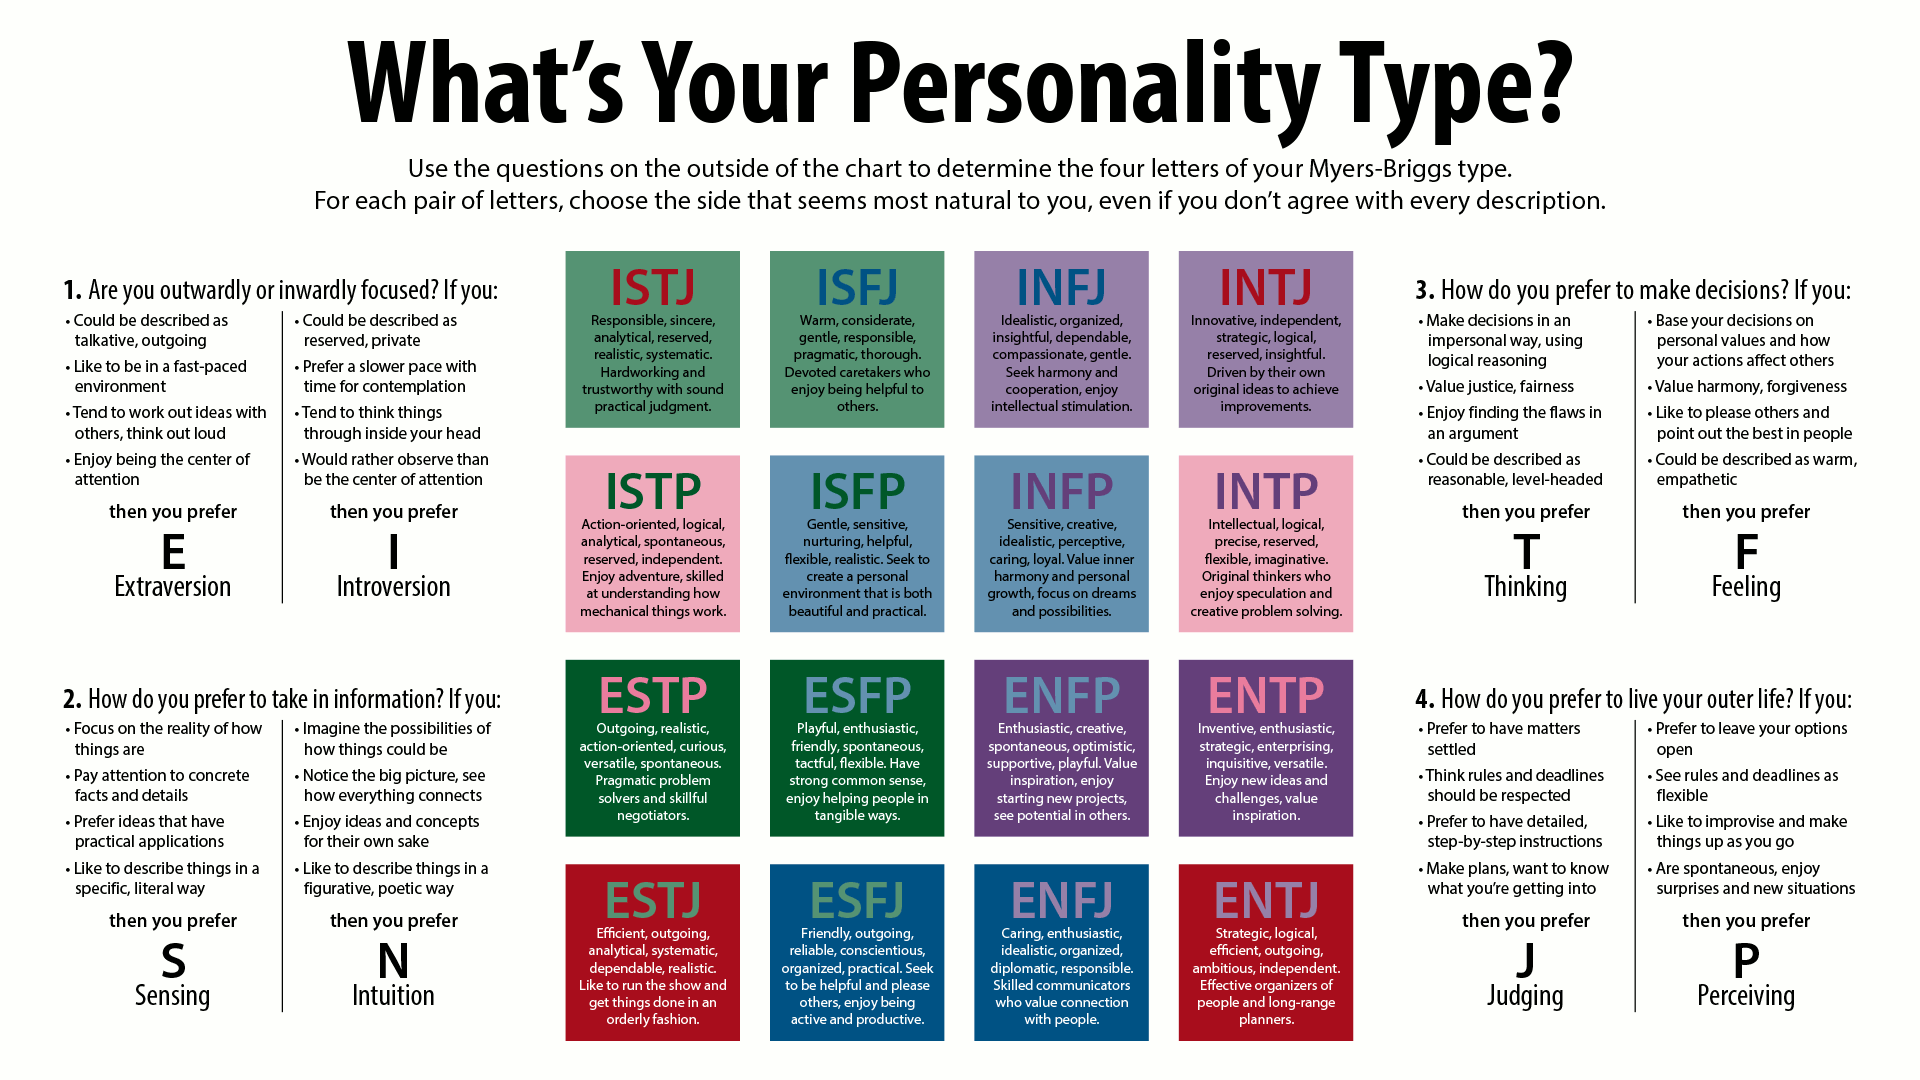 Listen in English - Is the MBTI meaningless?